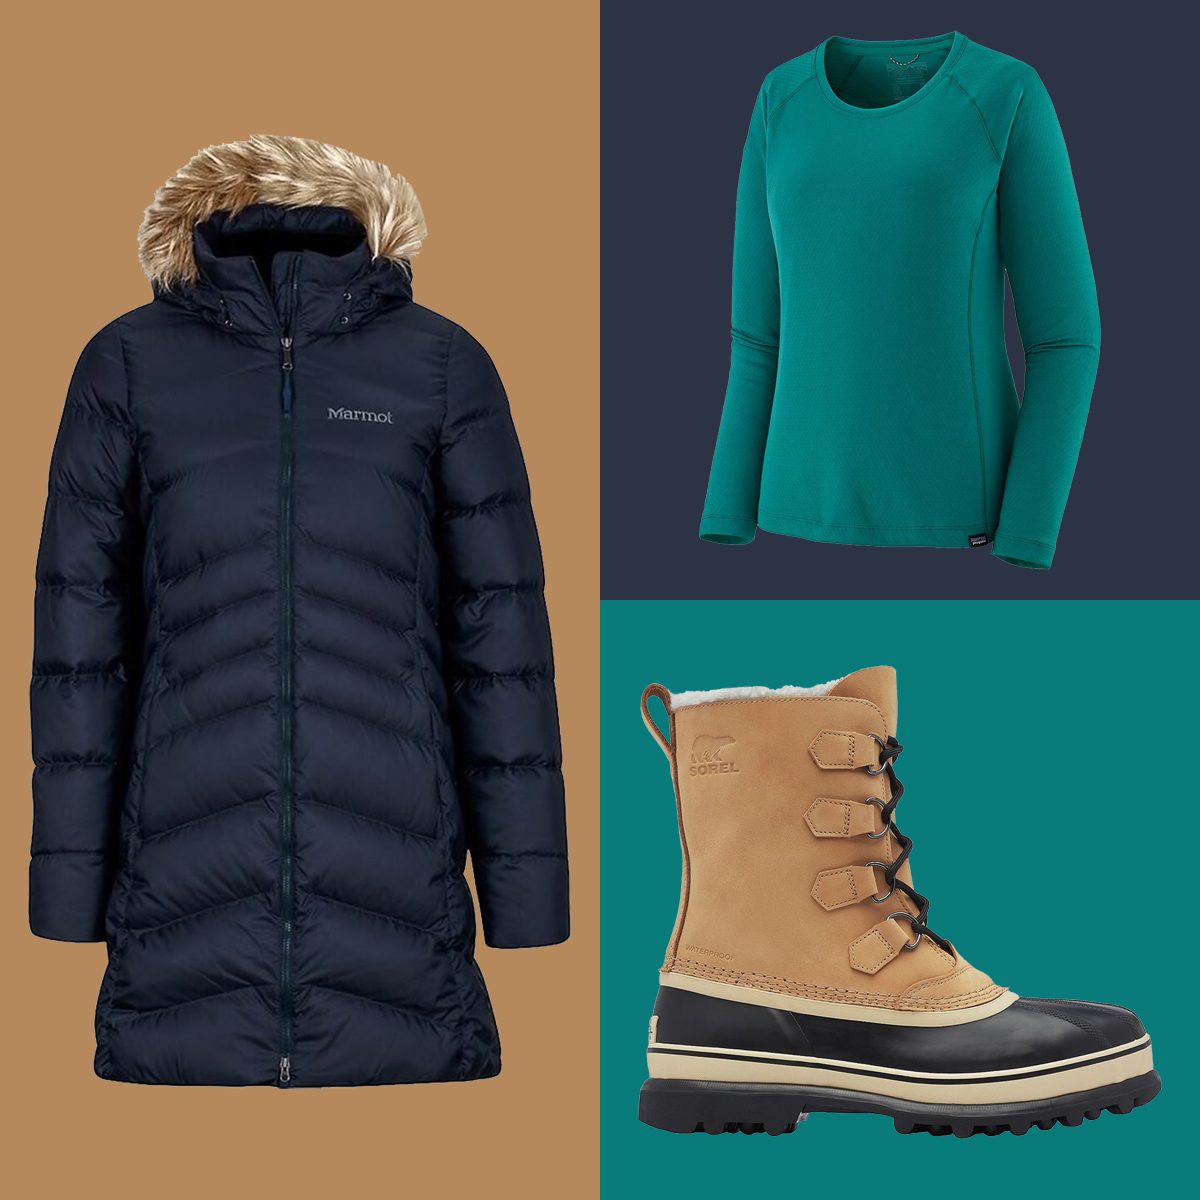 The Best Winter Clothes To Bring With You To the Cabin